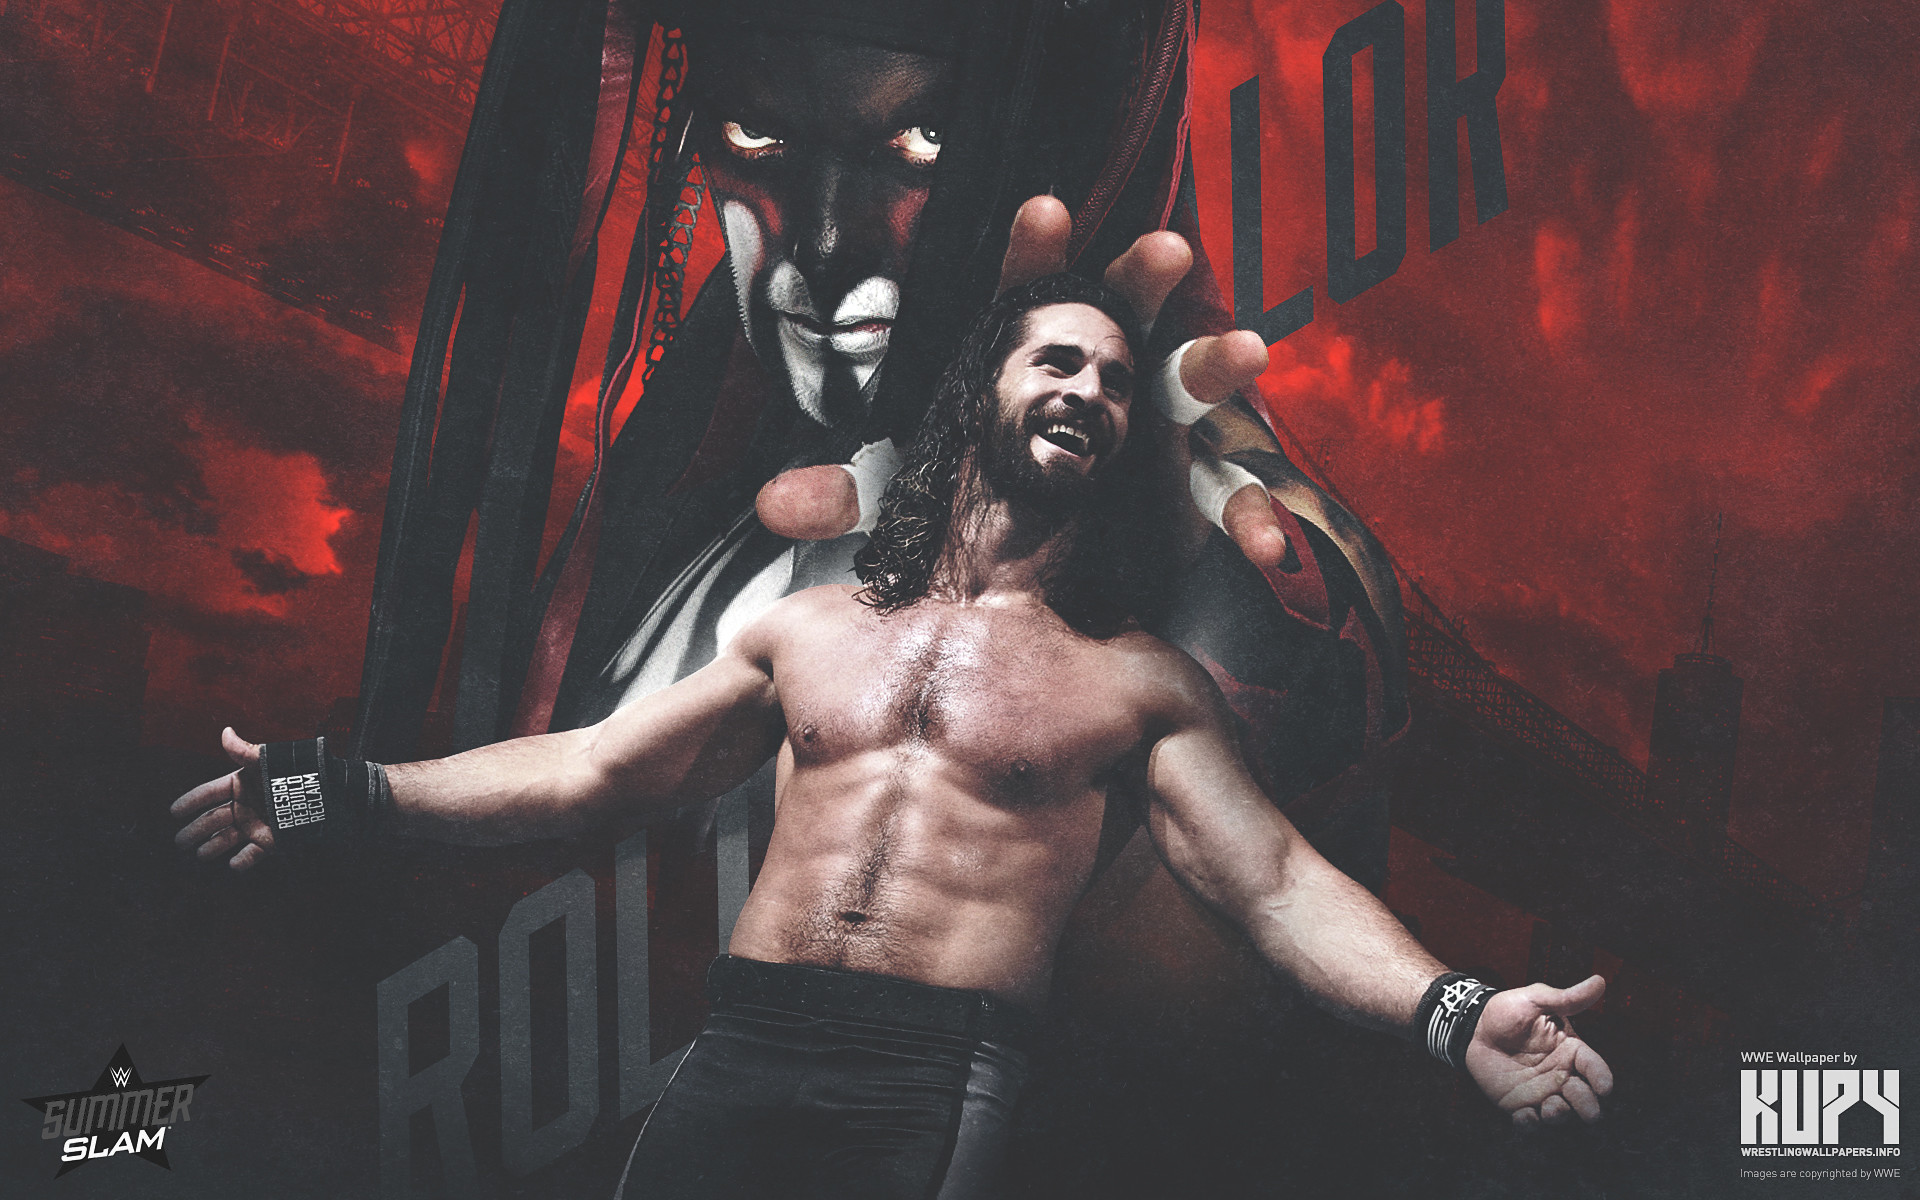 Seth Rollins For The Brand New Wwe Universal Championship Summerslam Wallpaper 1920 1200 1920x1200